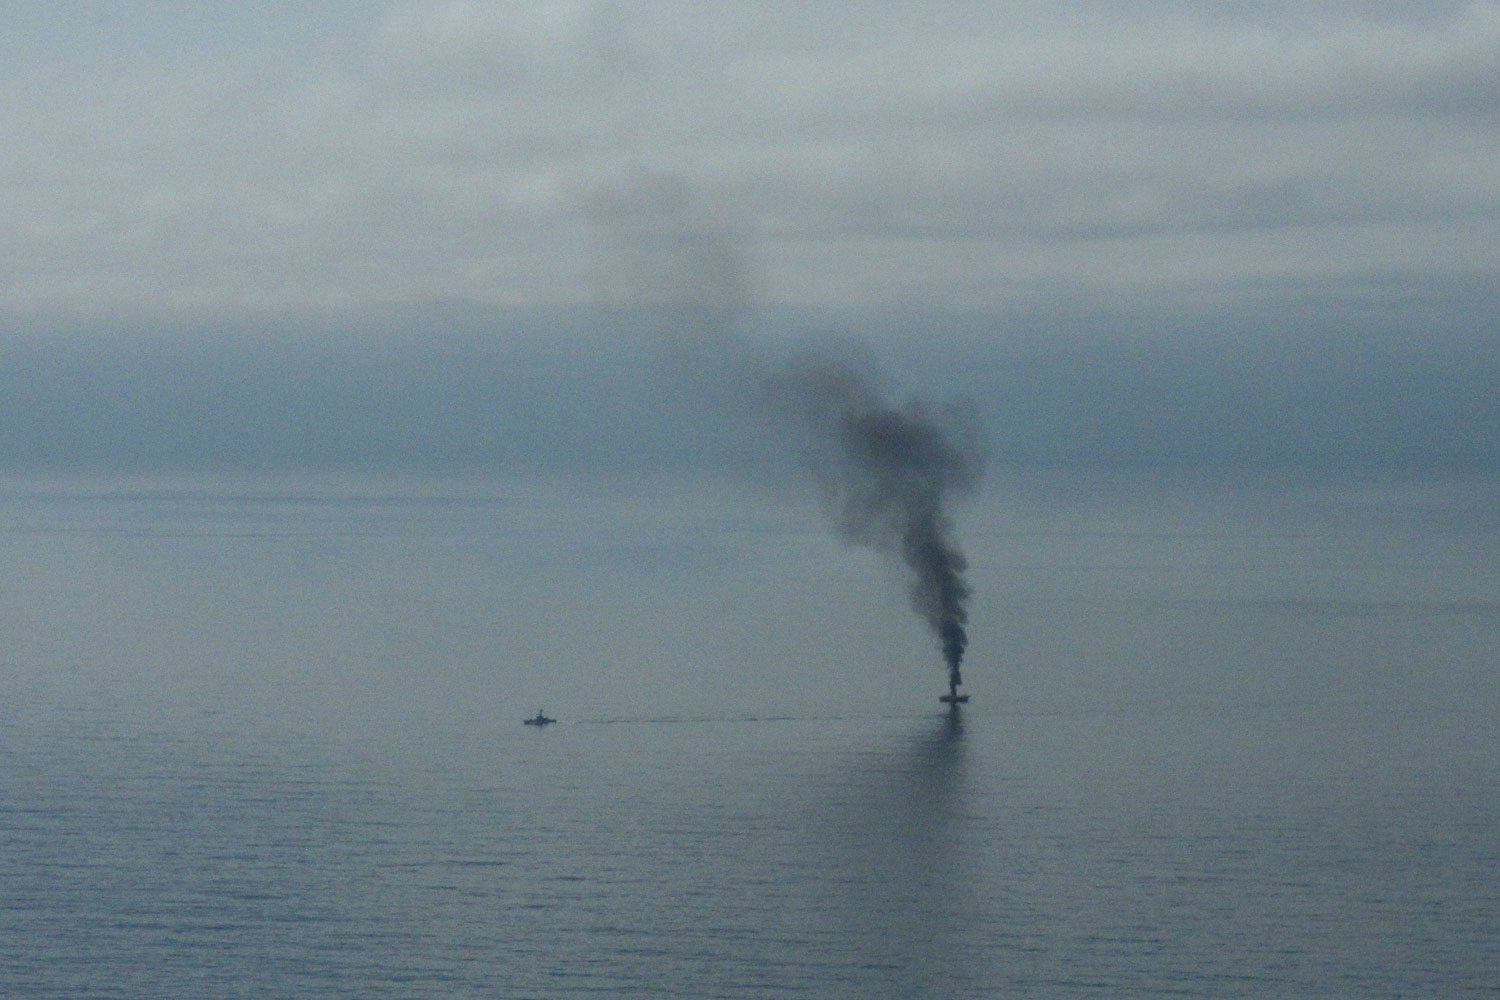 April 5, 2012. A giant plume of smoke rises from a derelict Japanese ship after it was hit by canon fire by a U.S. Coast Guard cutter in the Gulf of Alaska. The Coast Guard decided to sink the ship dislodged by last year's tsunami because it was a threat to maritime traffic and could have an environmental impact if it grounded.